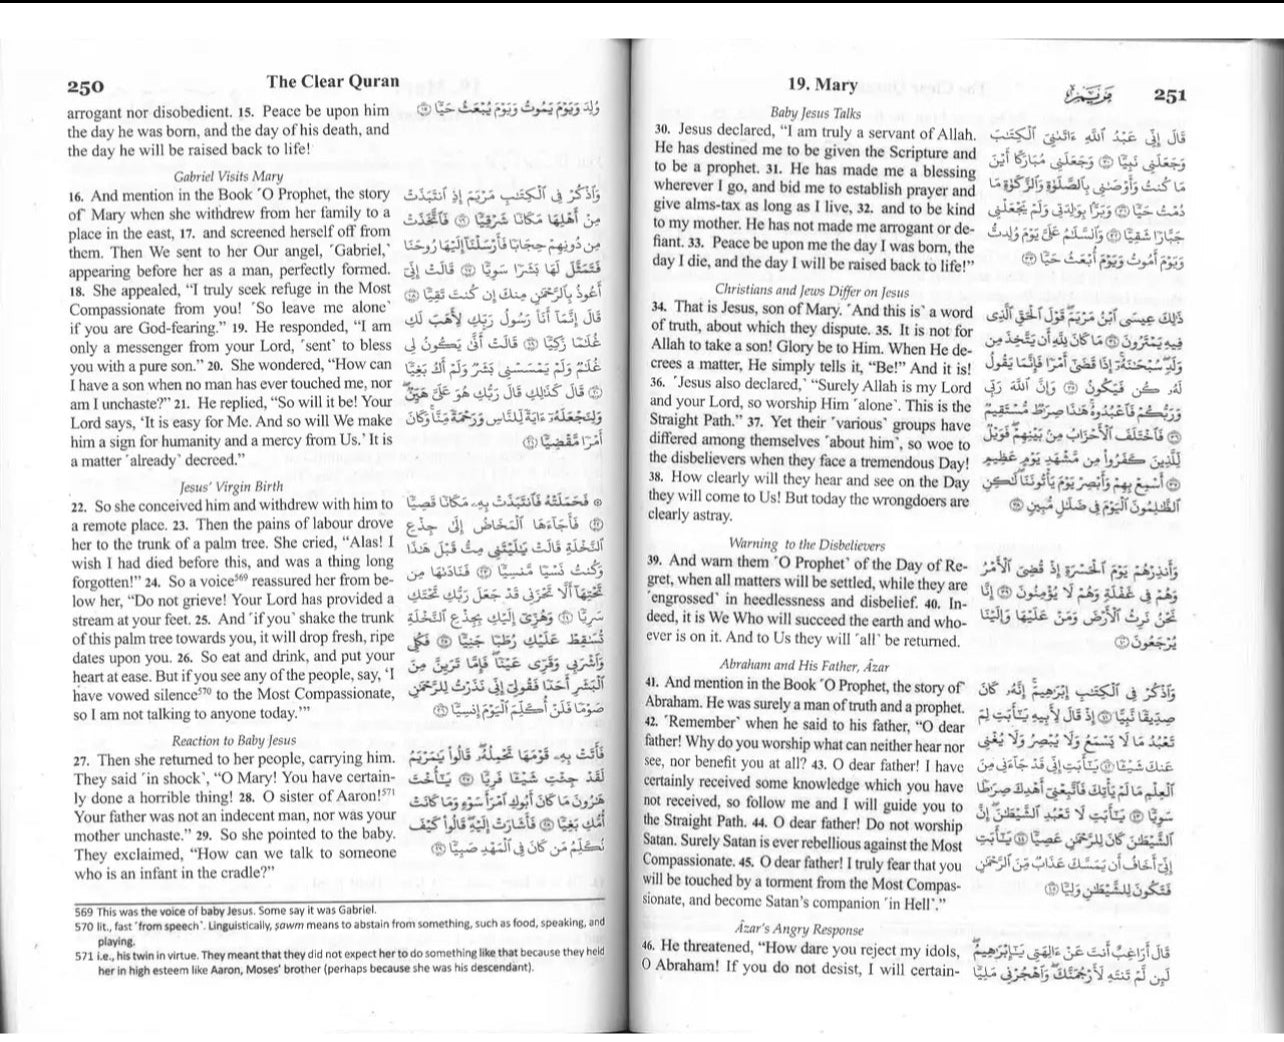 The Clear Quran Arabic/English Parallel Adition